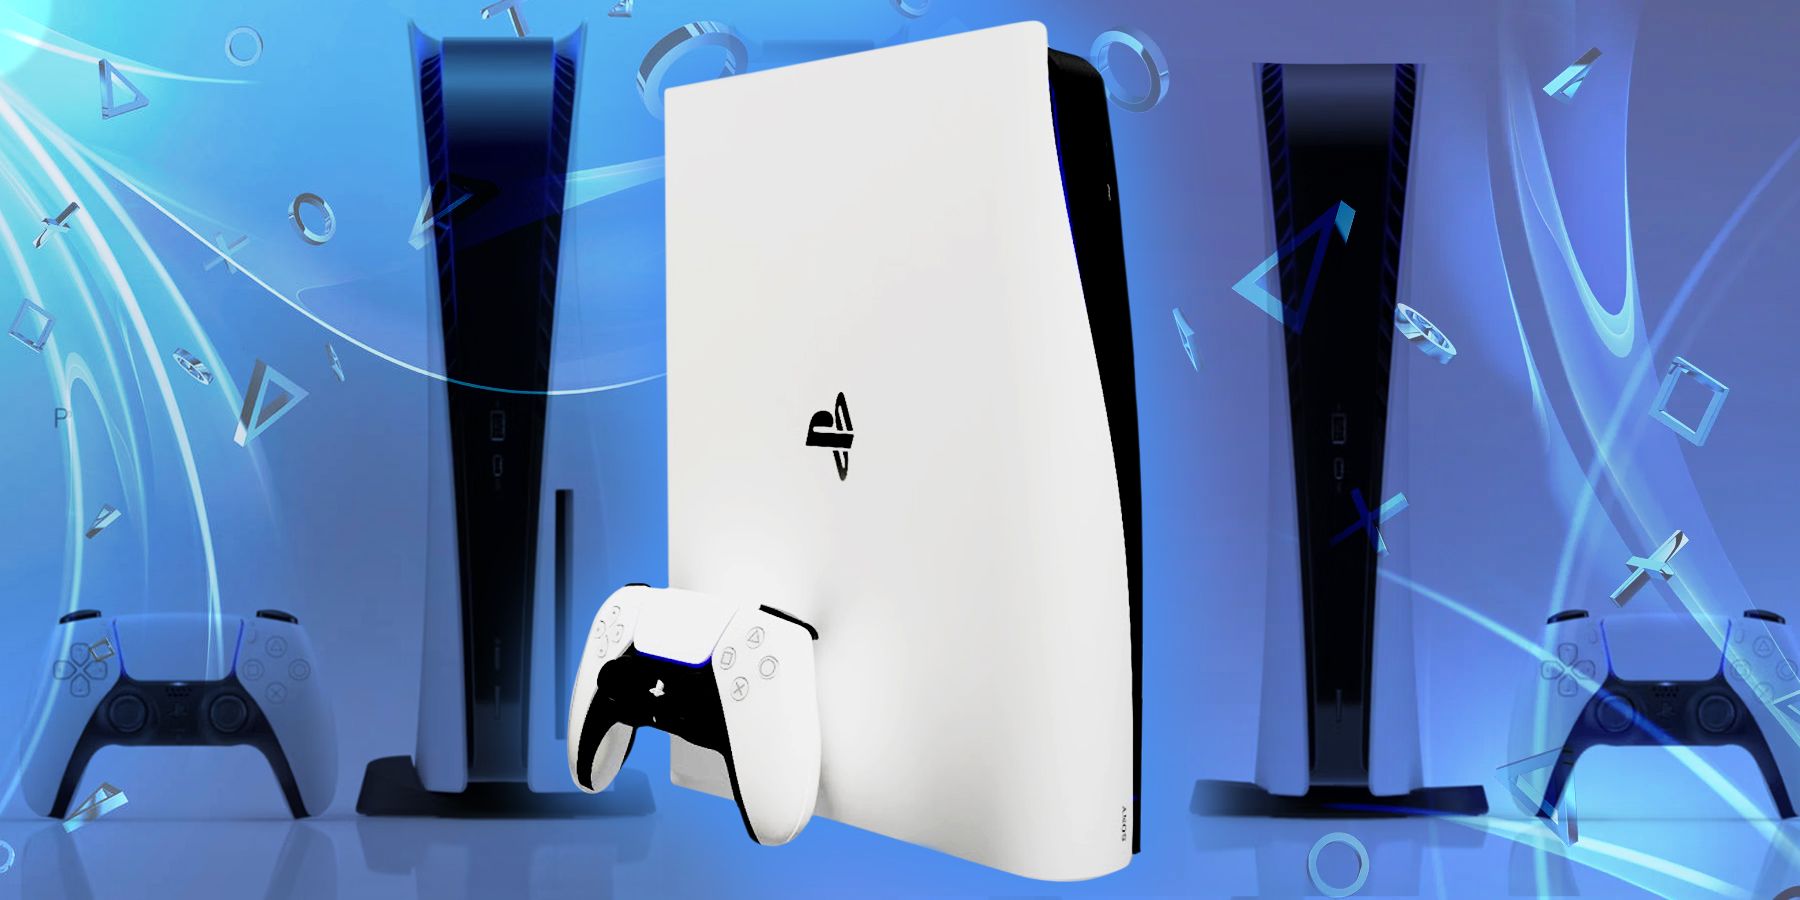 The PS5 Slim